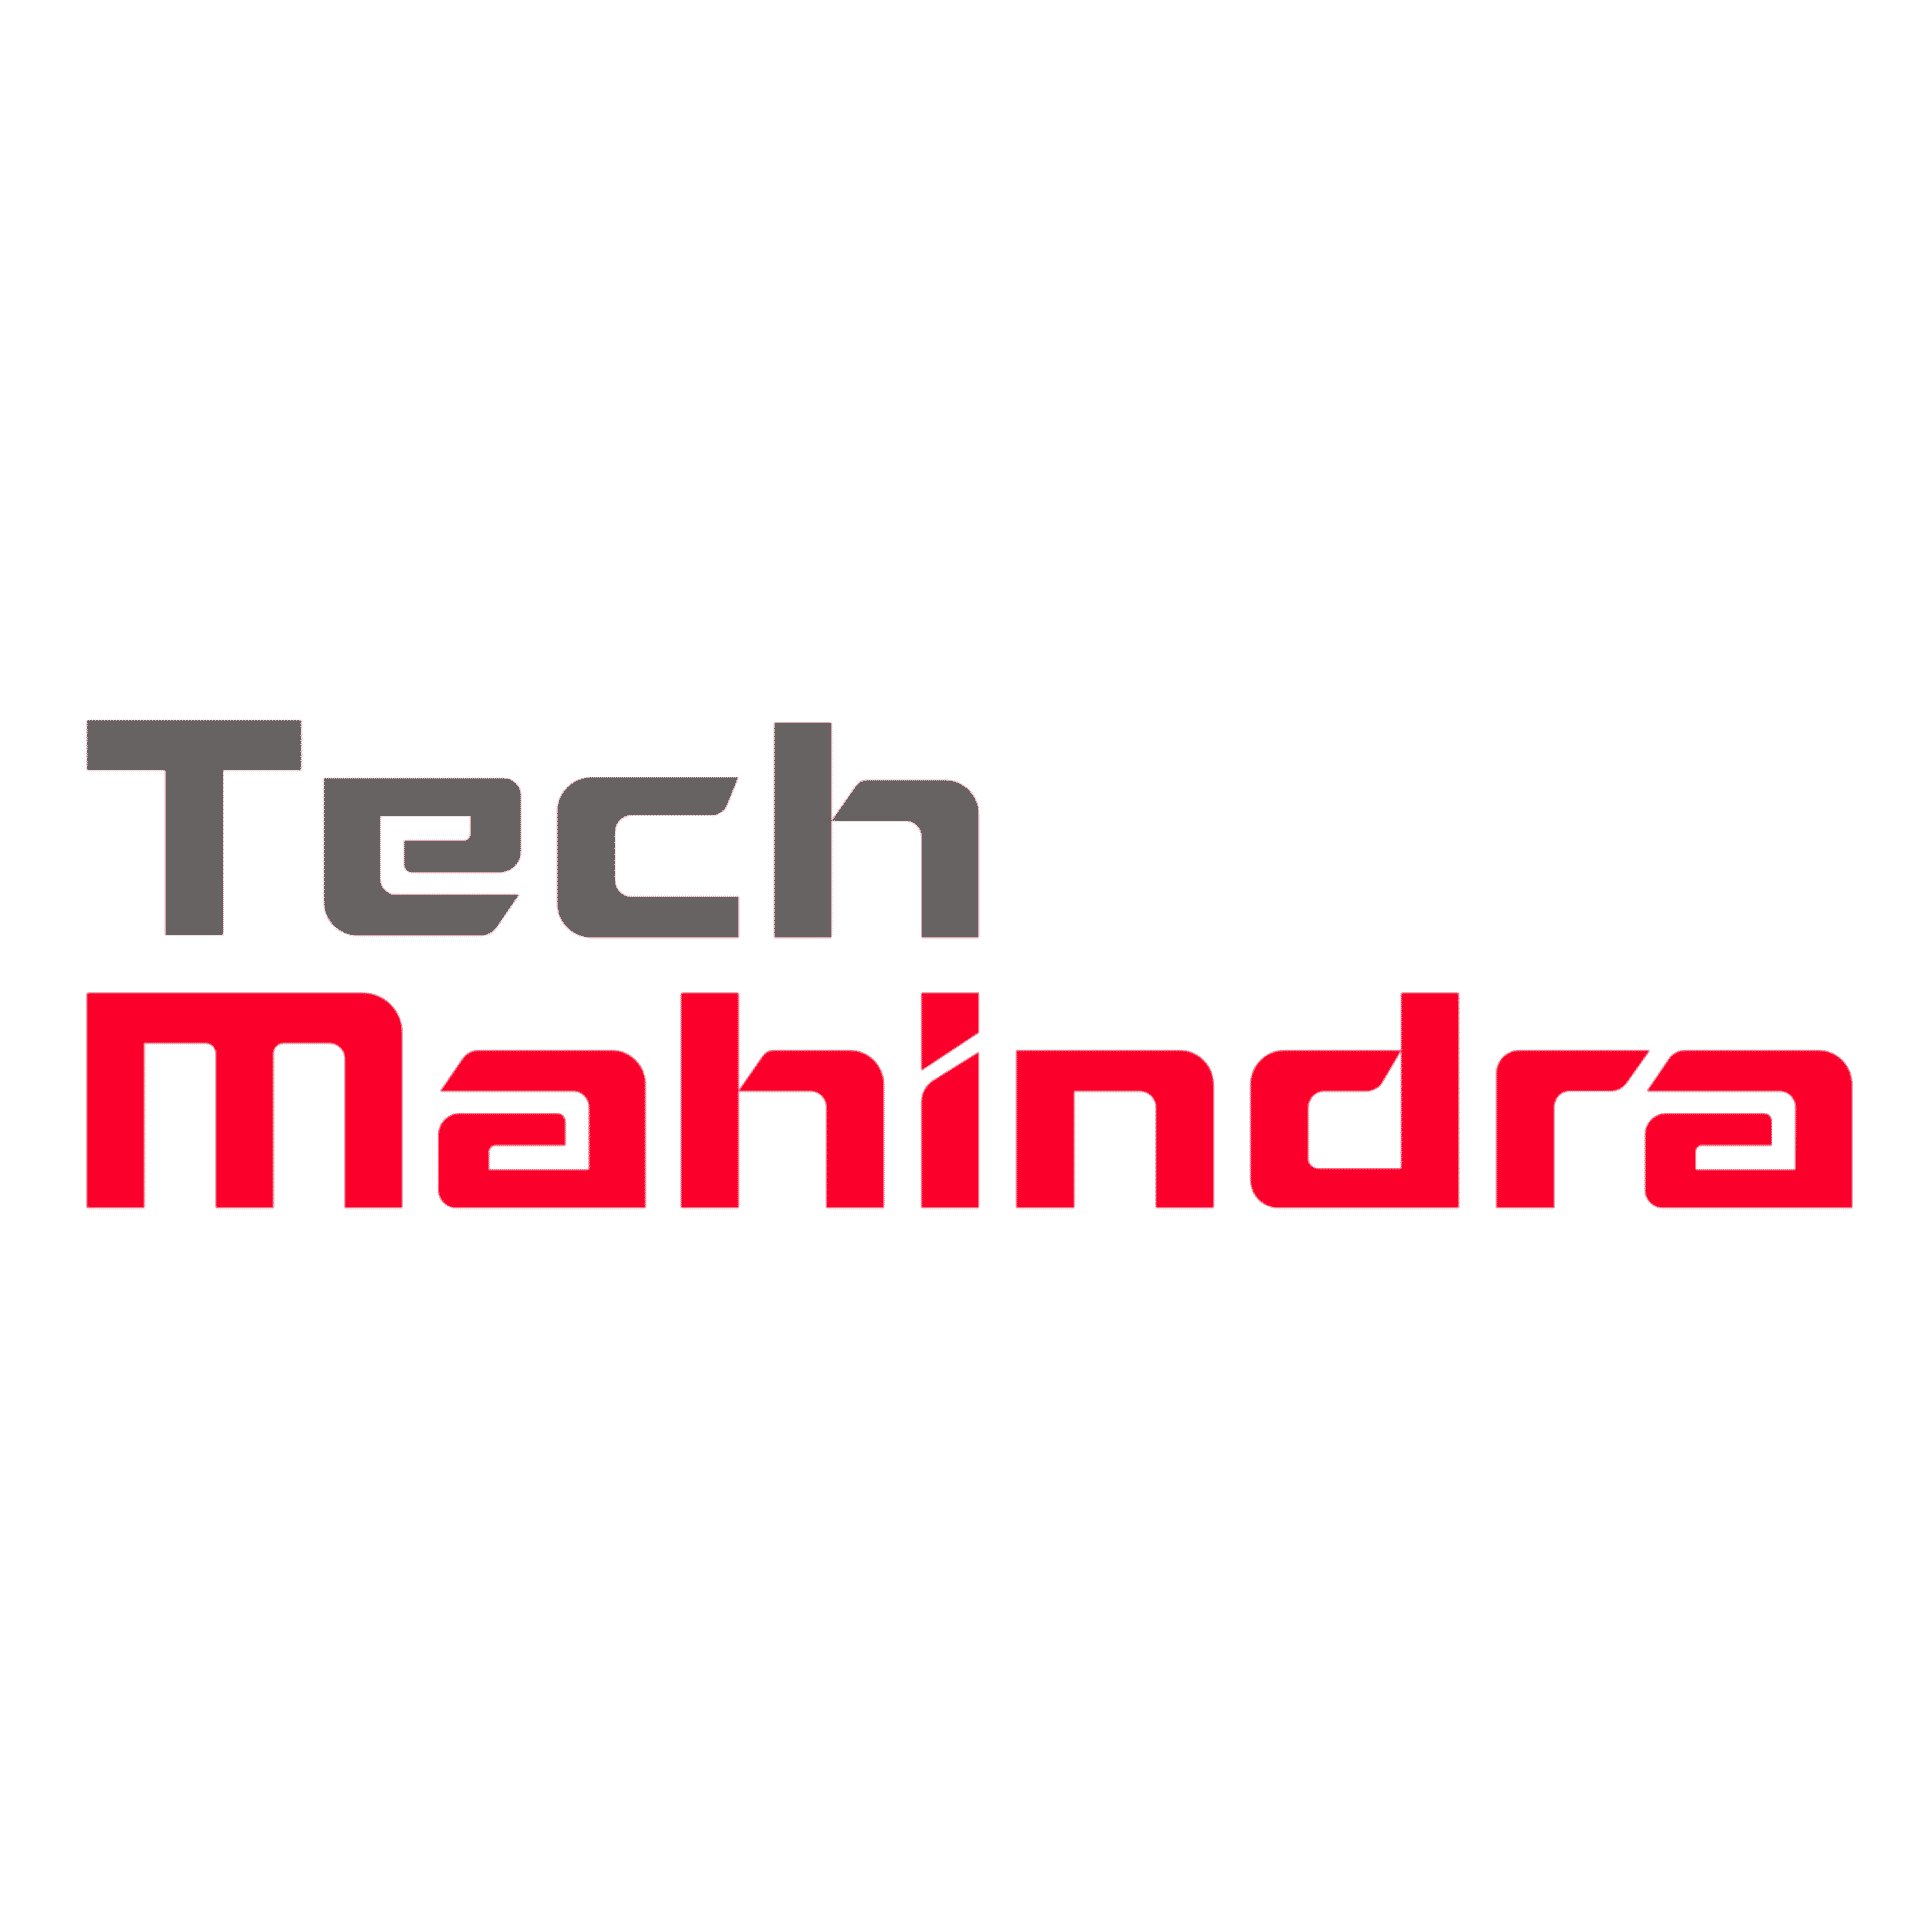 Ford and Mahindra partnership termination expanded | The Citizen